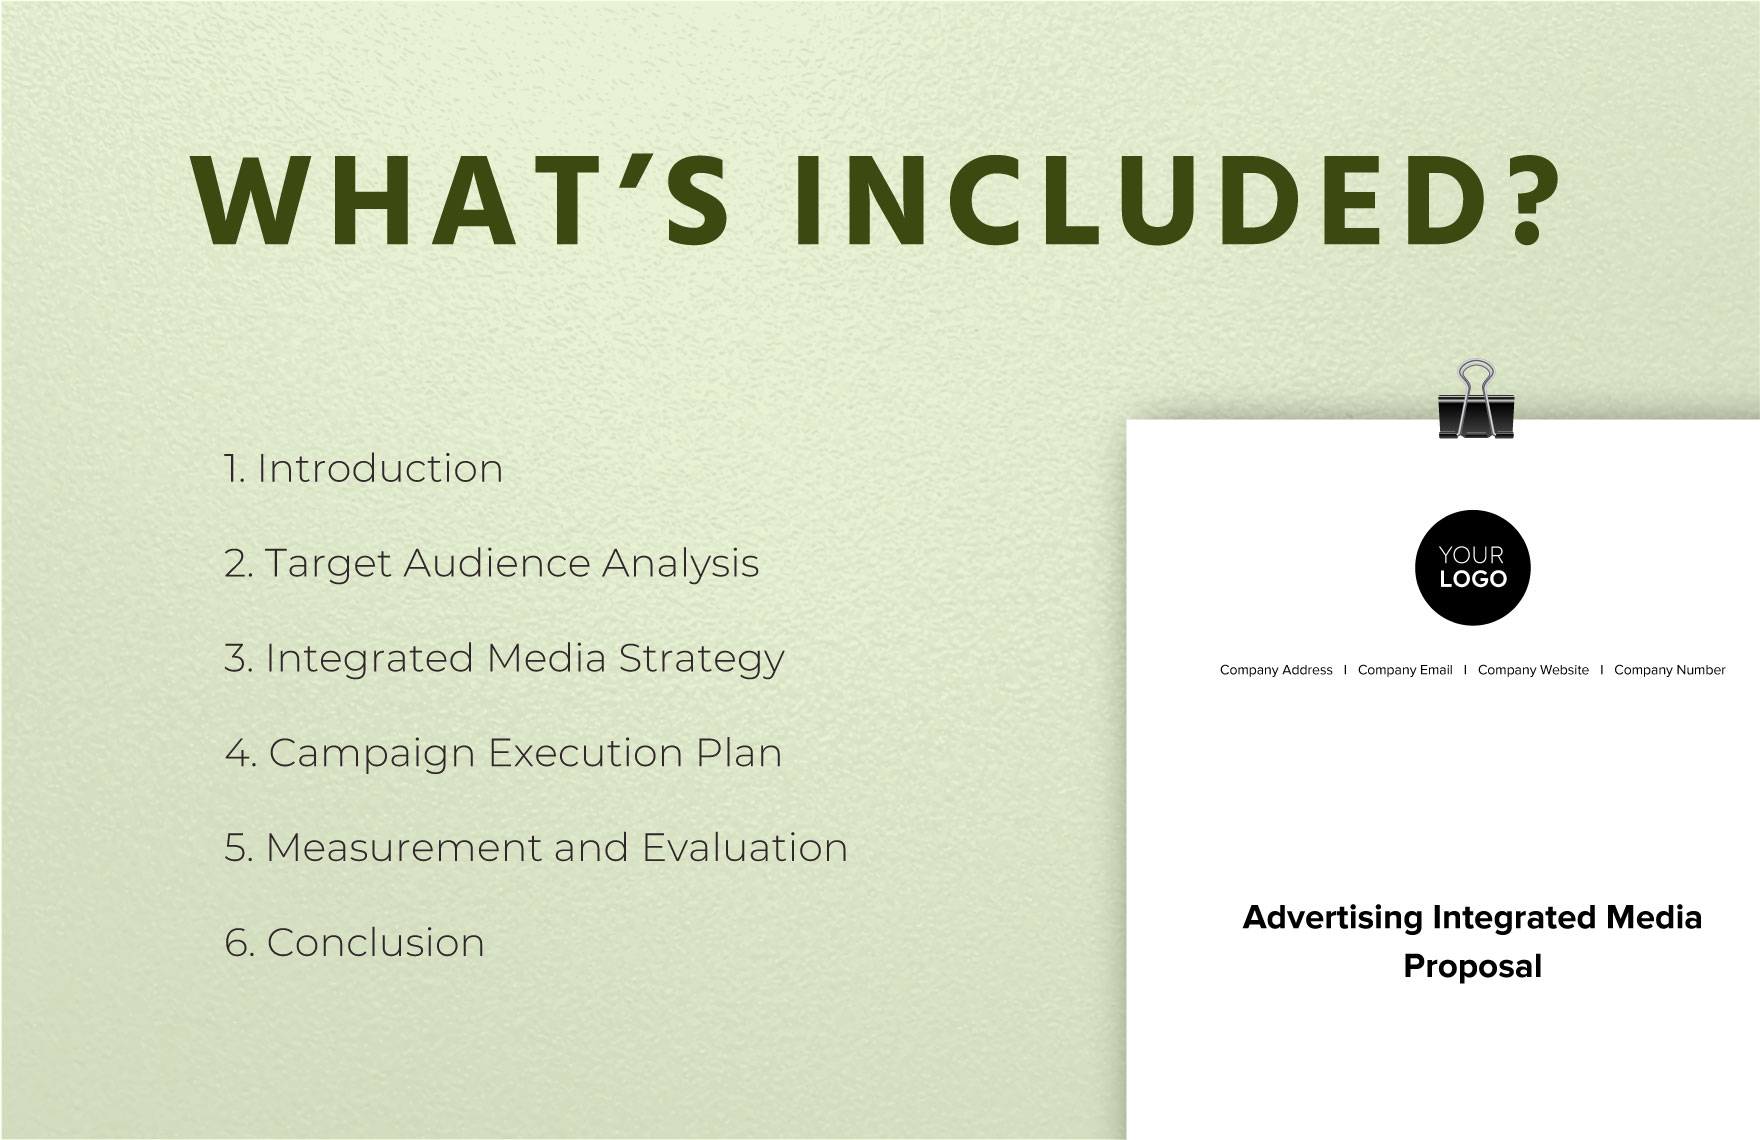 Advertising Integrated Media Proposal Template